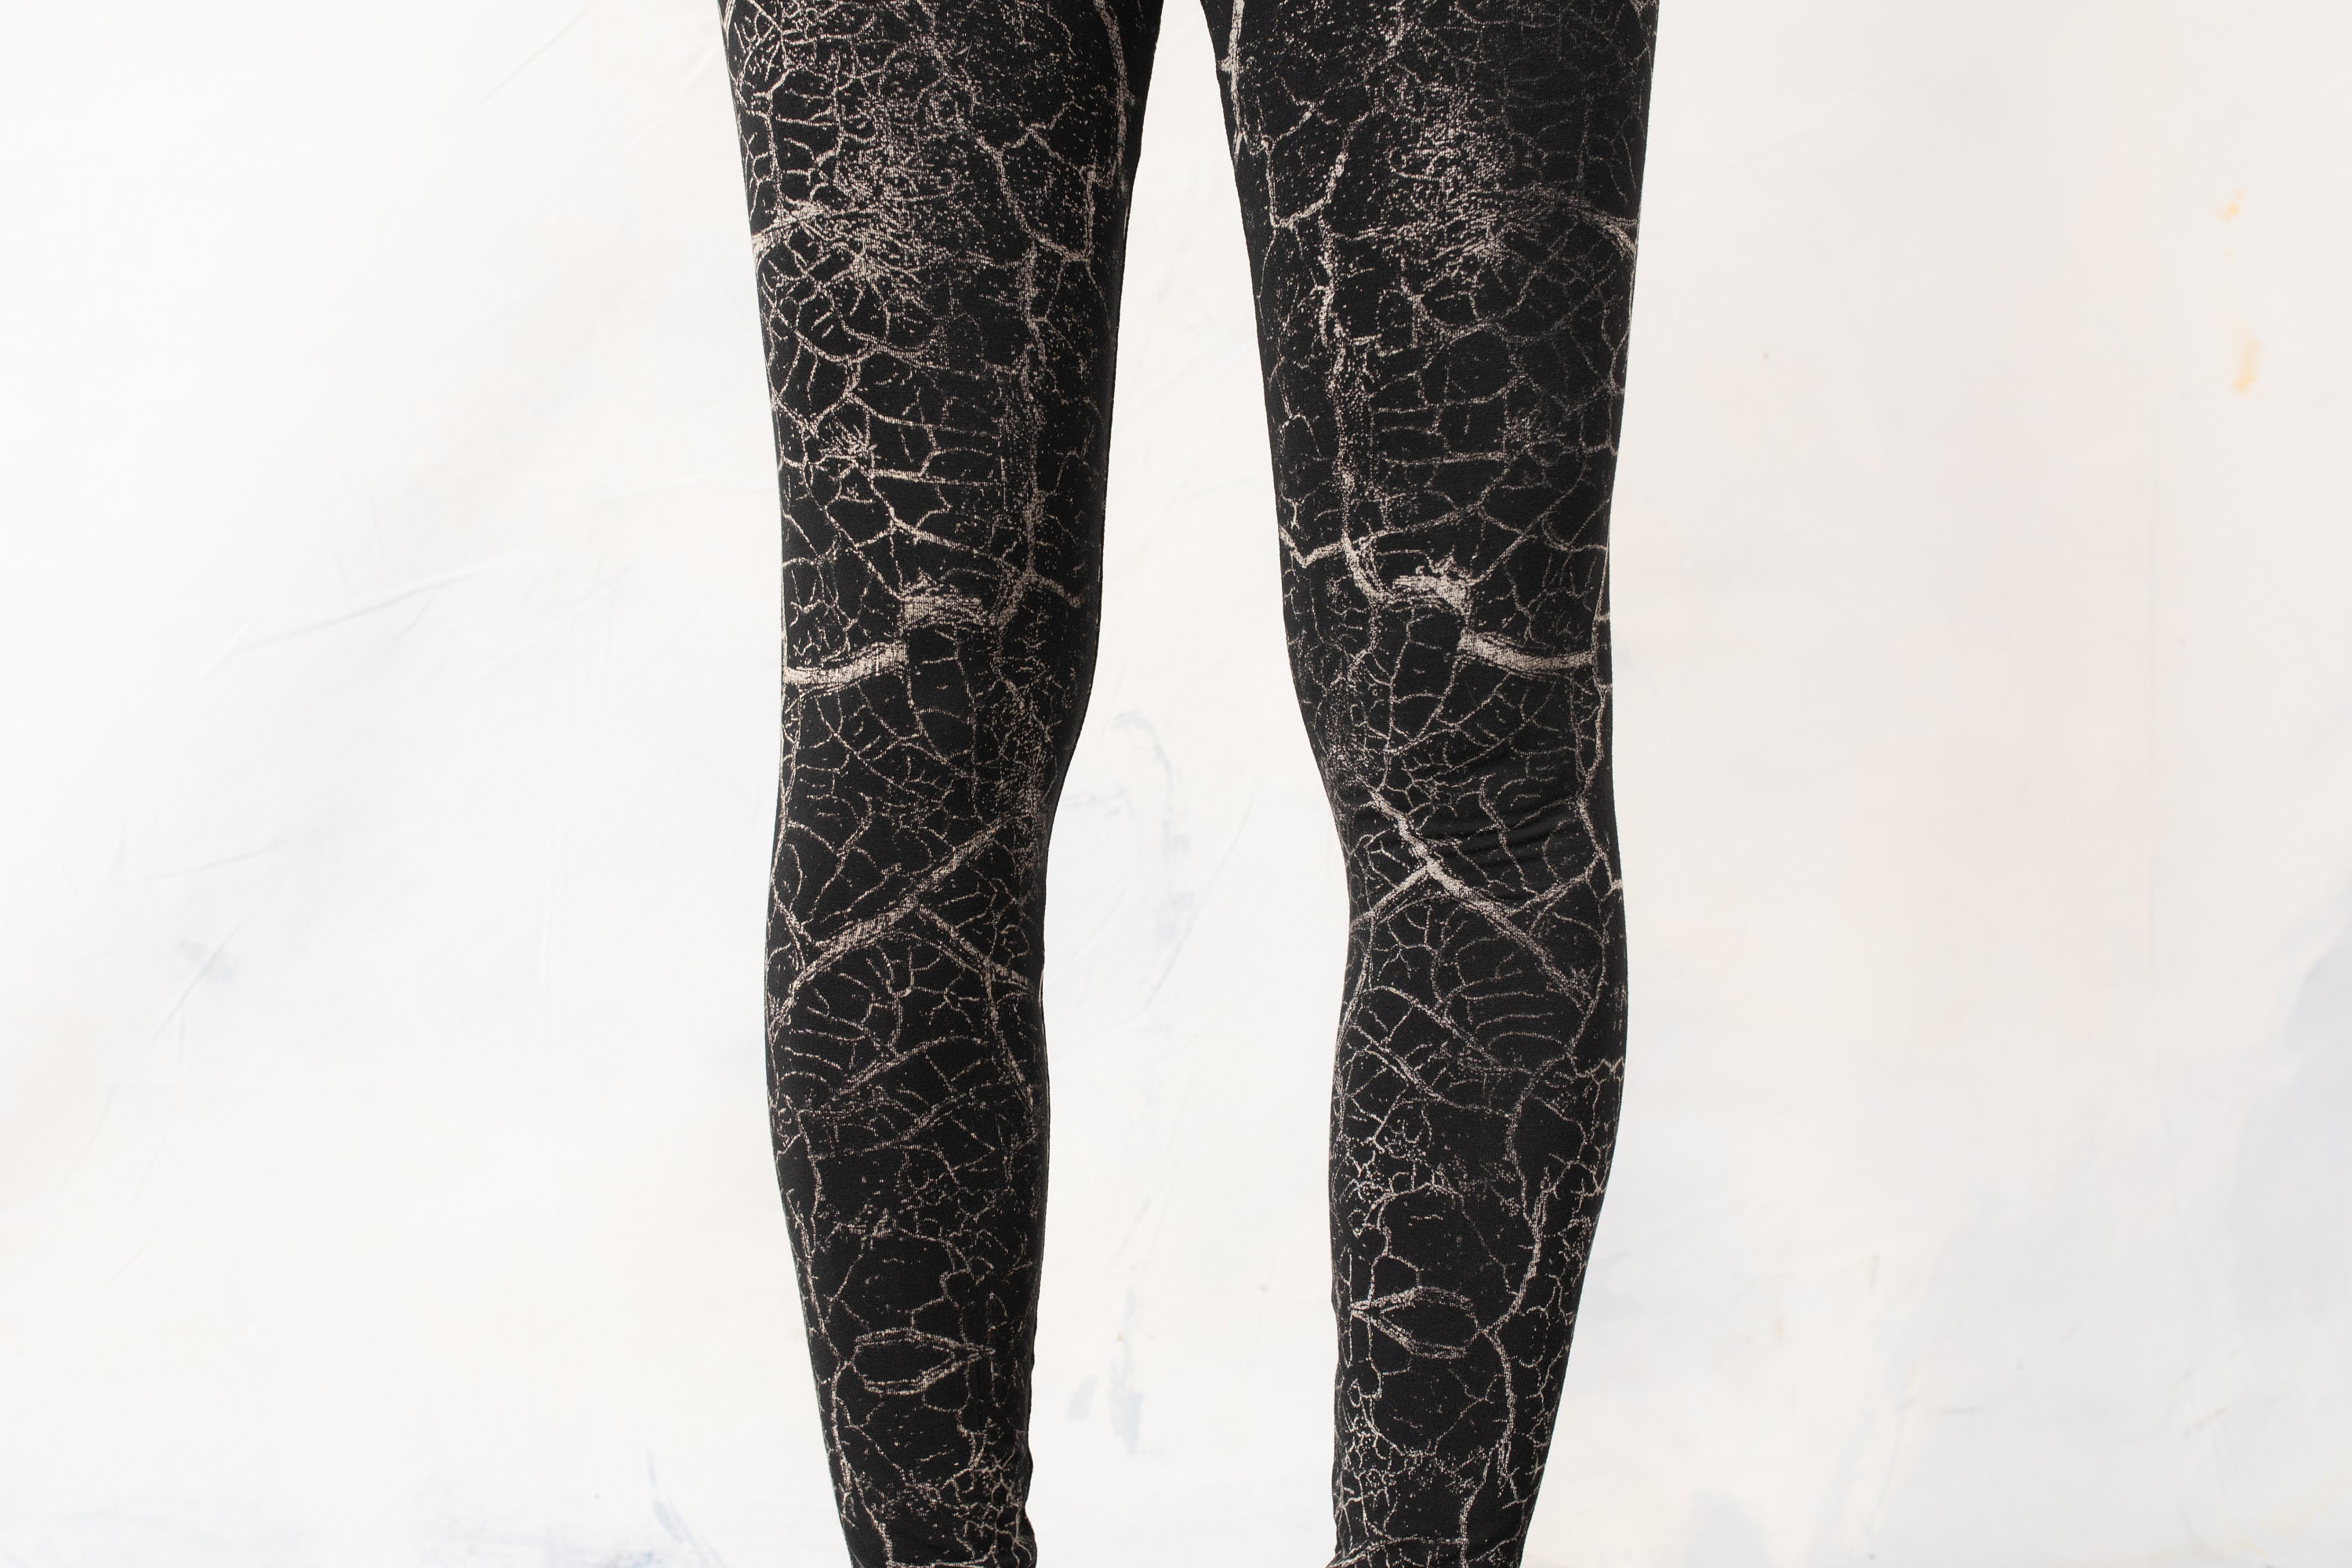 LEGGINGS with an abstract cracked Earth Pattern - unisex - black-gray-beige